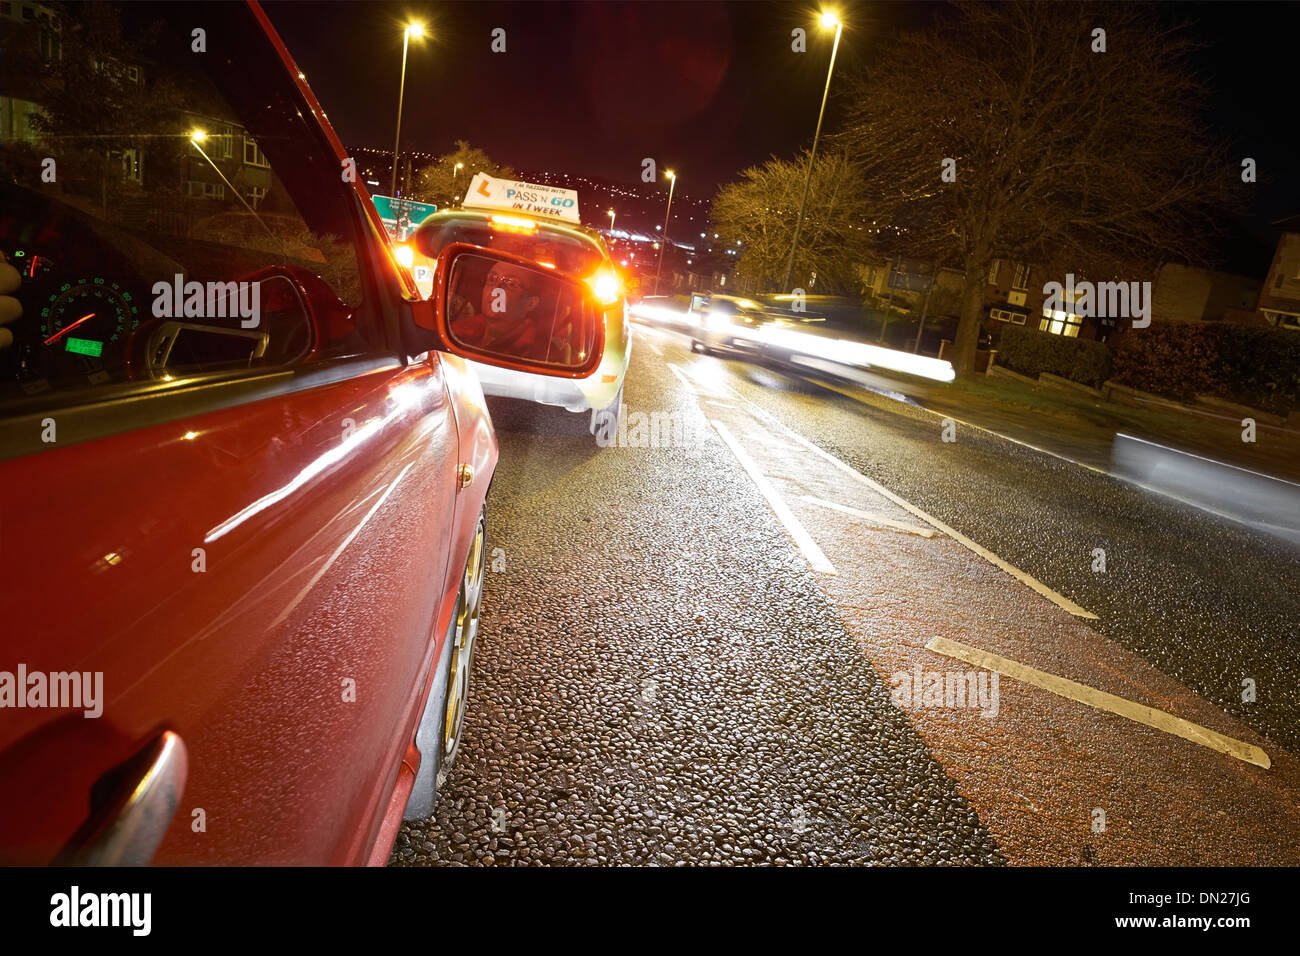 Learner driver on a busy road at night. Stock Photo